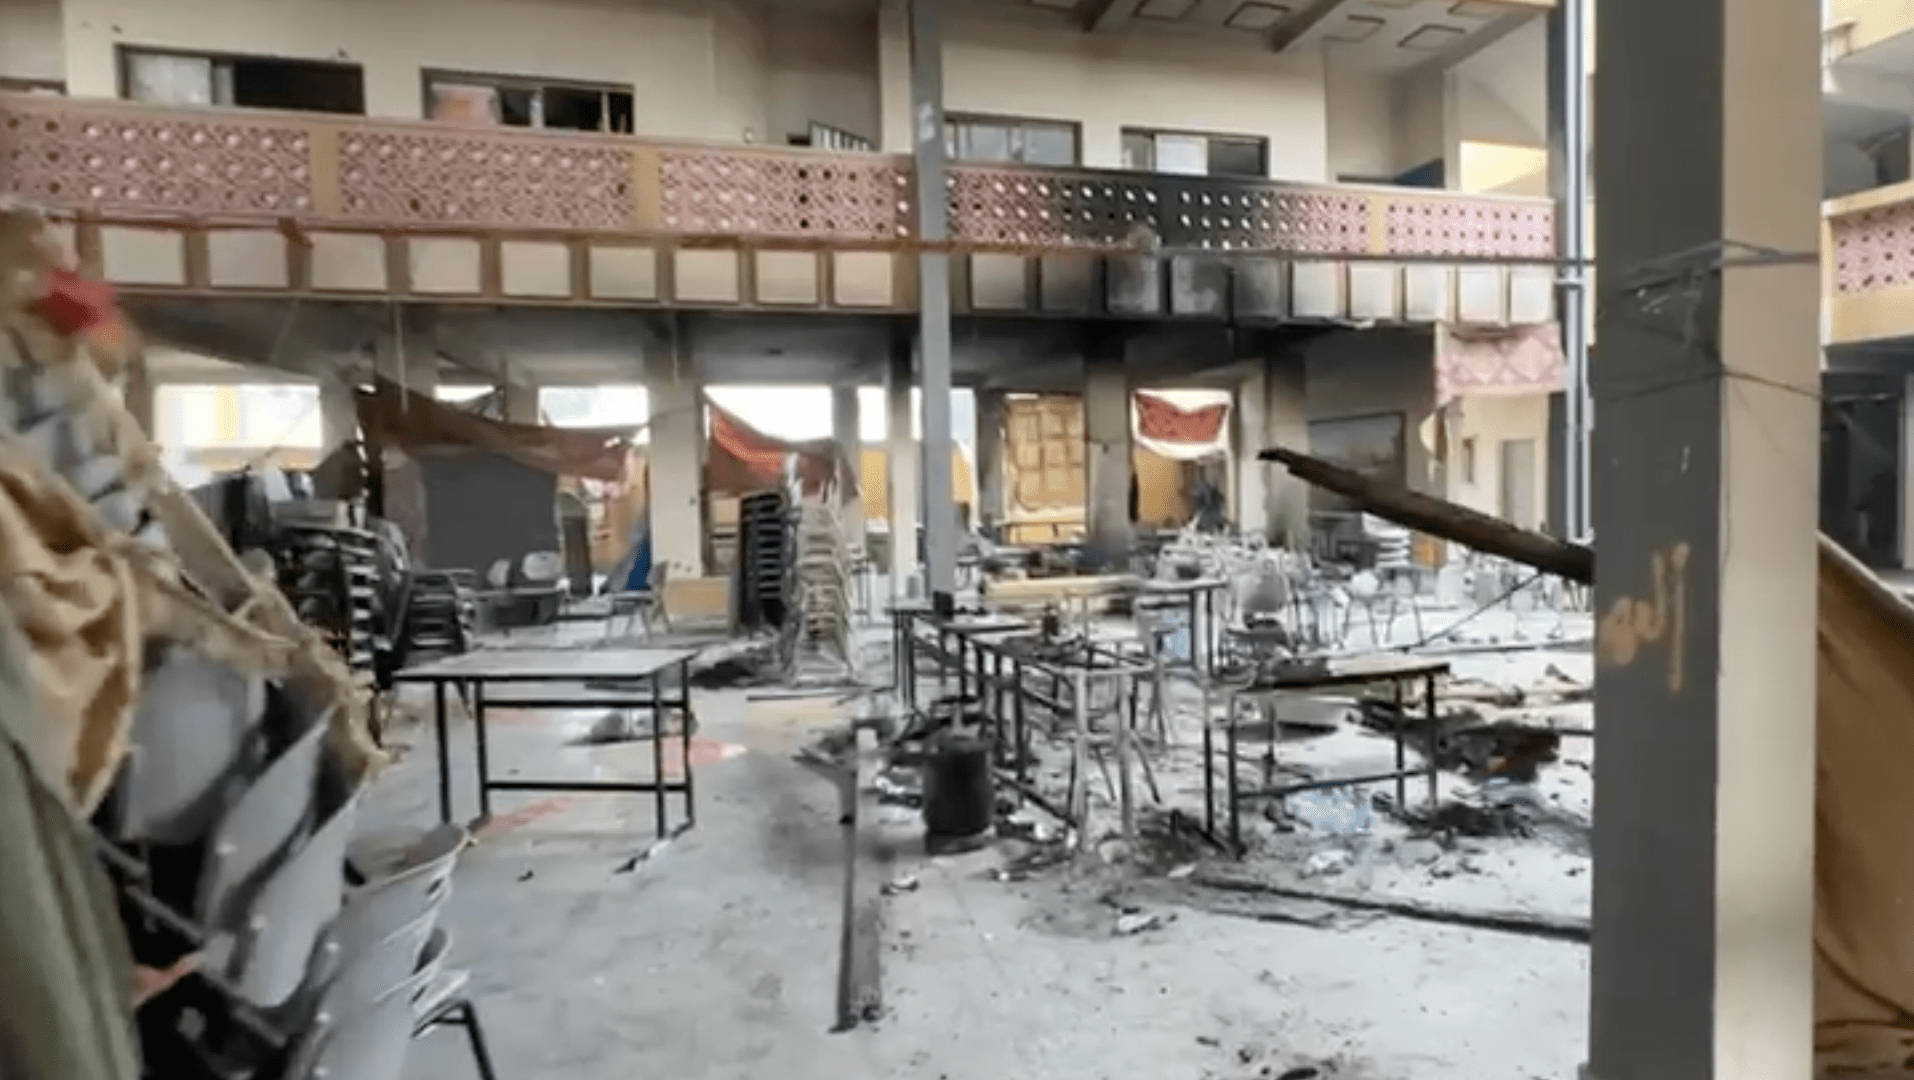 Civilians sheltering inside a Gaza school killed execution-style | Israel-Palestine conflict News